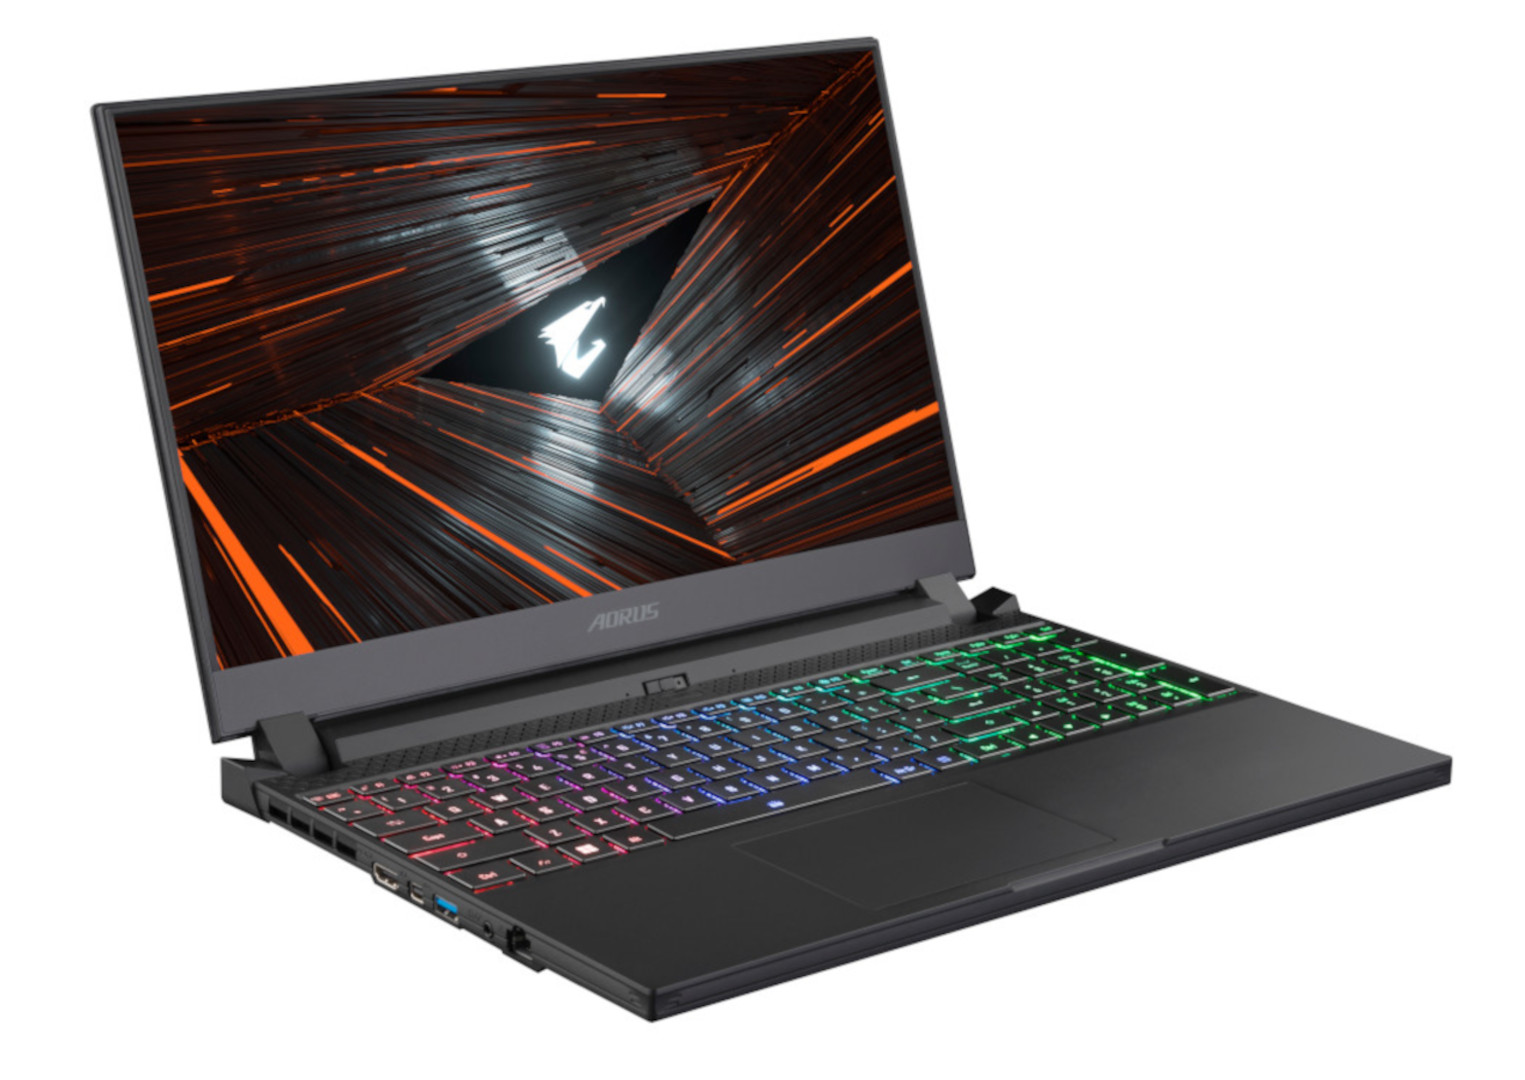 The best gaming laptop under $1,500 is the Gigabyte Aorus 5 SE4